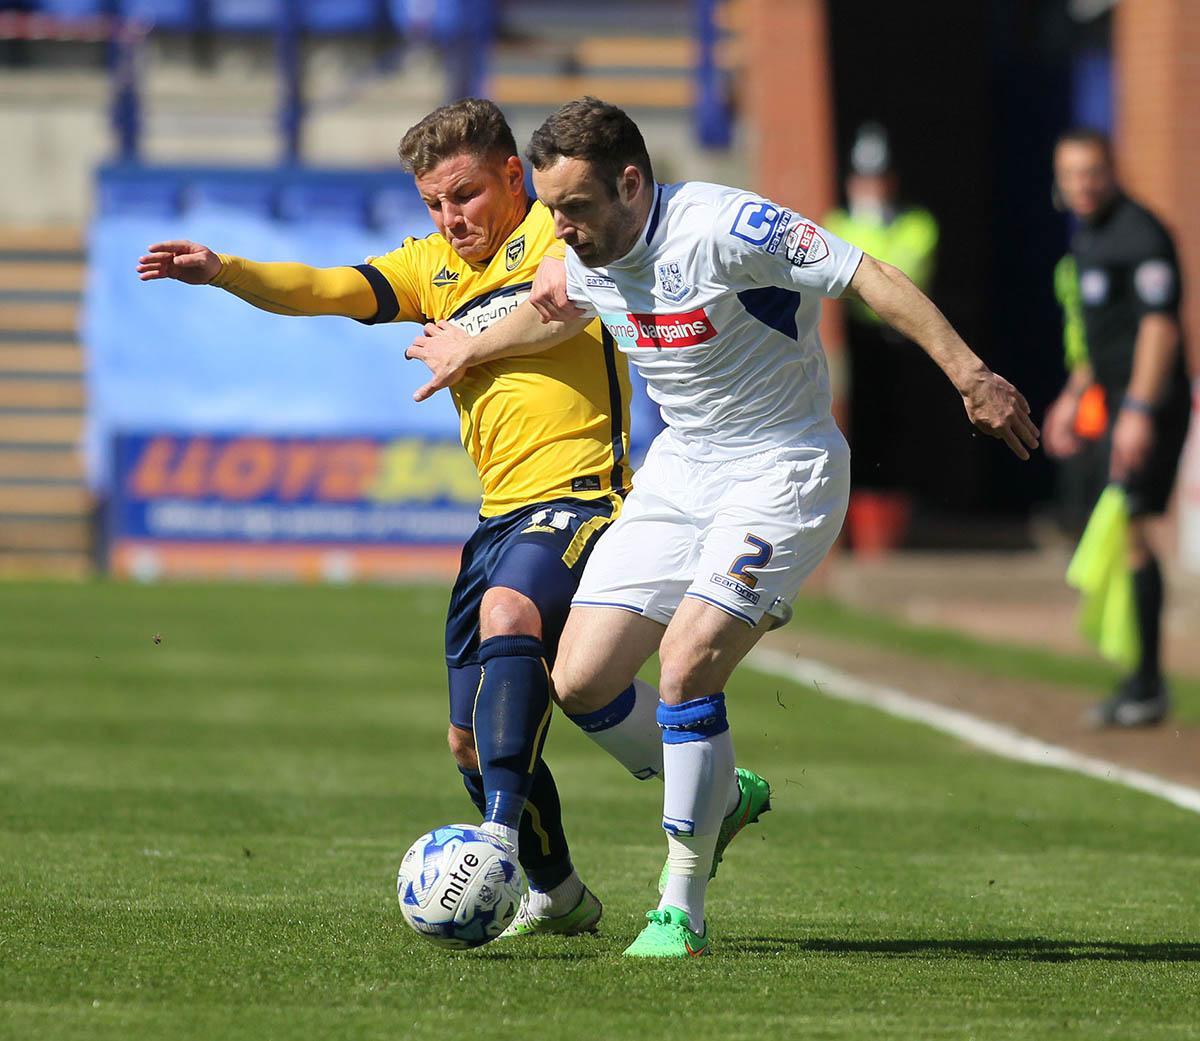 Tranmere Rovers V Oxford United in pictures